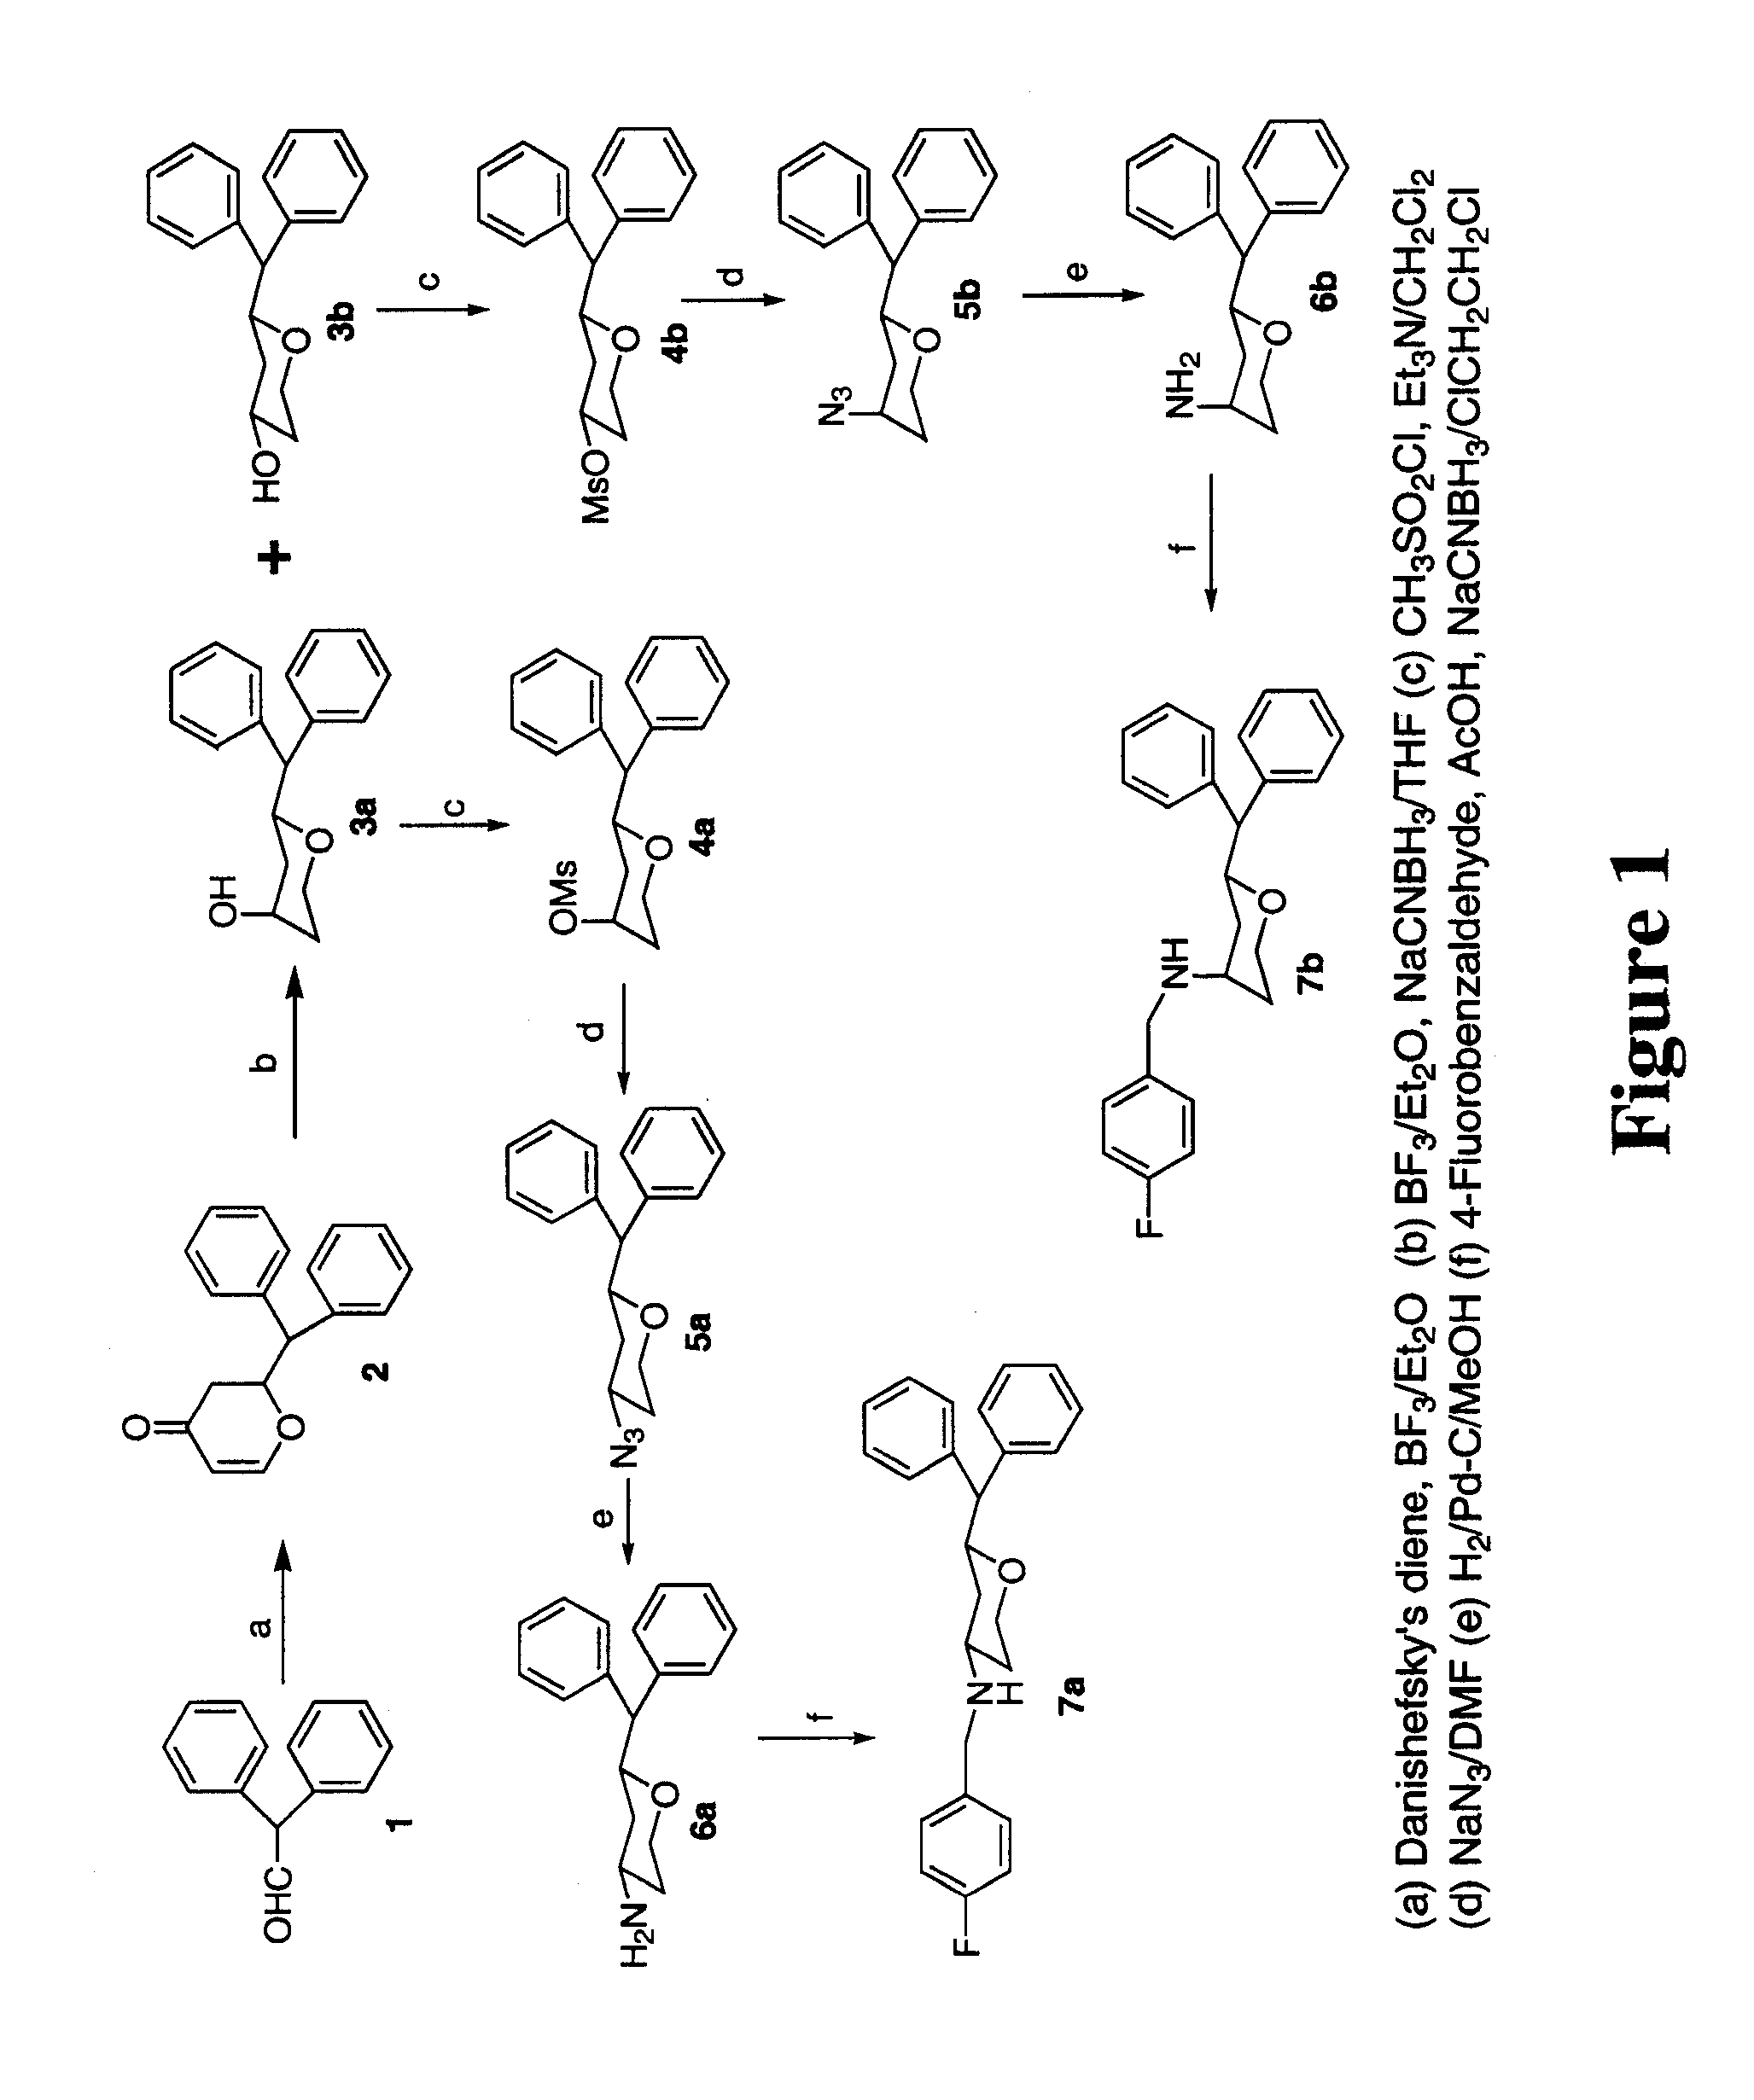 Tri-substituted 2-benzhydryl-5-benzylamino-tetrahydro-pyran-4-ol and 6-benzhydryl-4-benzylamino-tetrahydro-pyran-3-ol analogues, and novel, 3,6-disubstituted pyran derivatives